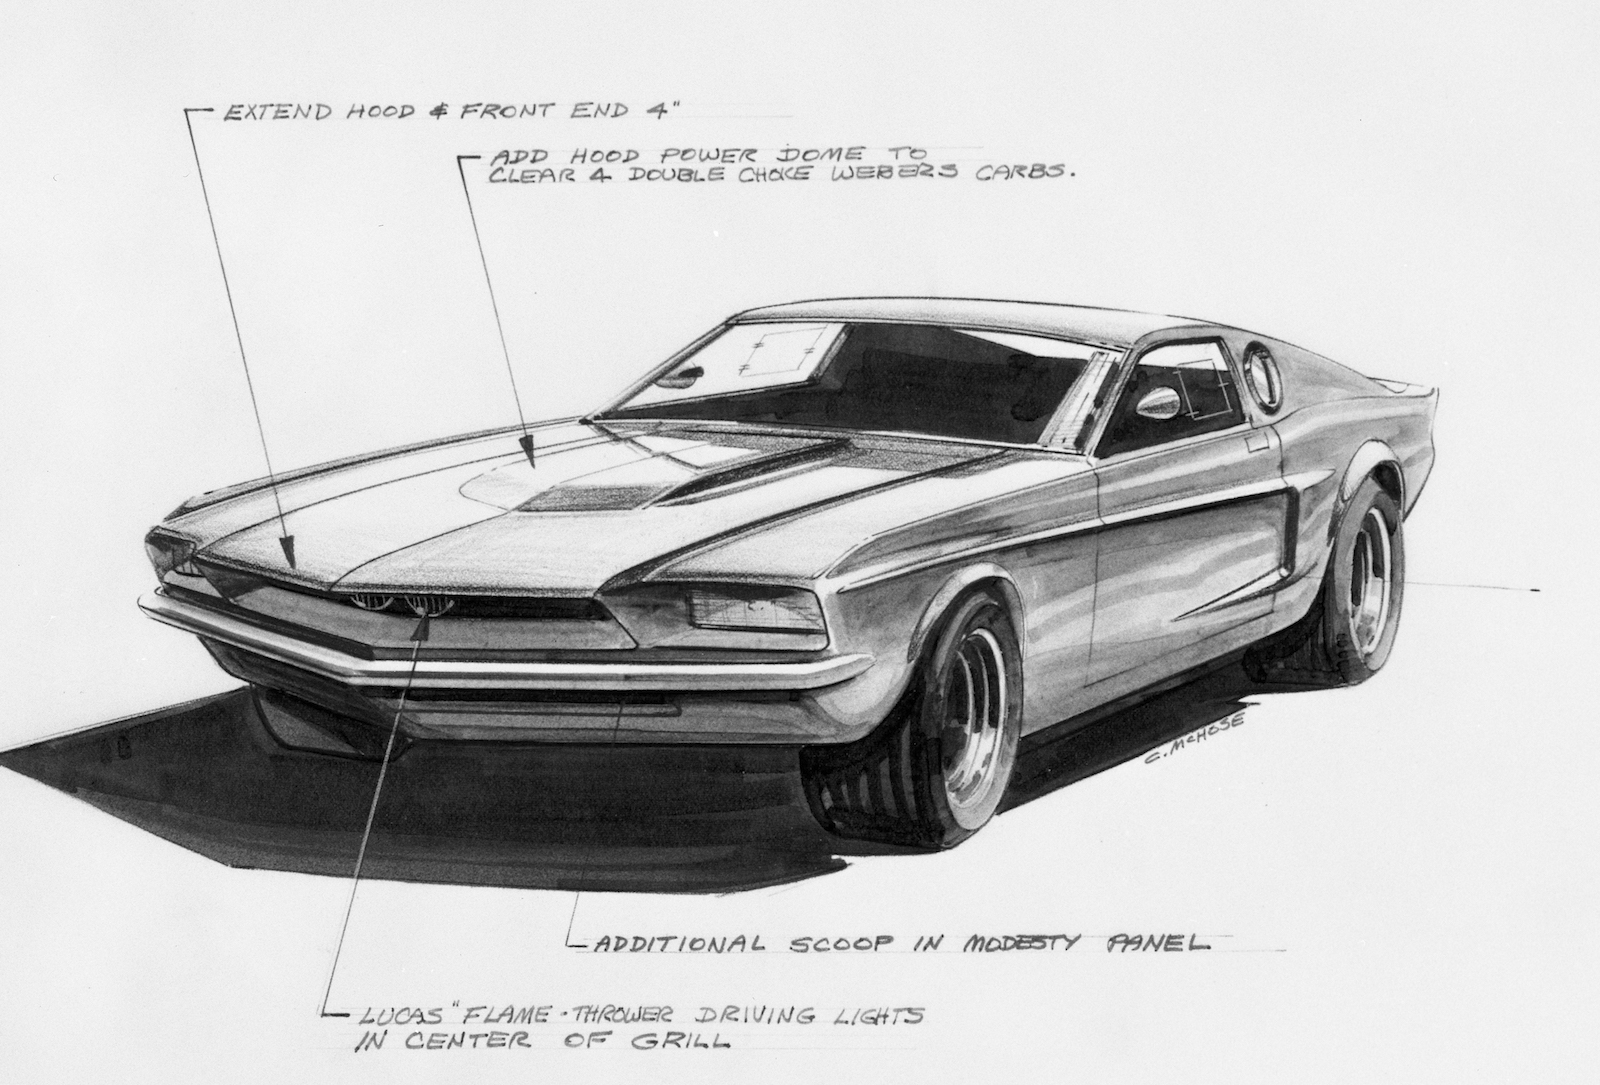 The 1967 Ford Mach I Mustang:  Where Racing Influenced The Breed (Even If Only The Prototype)